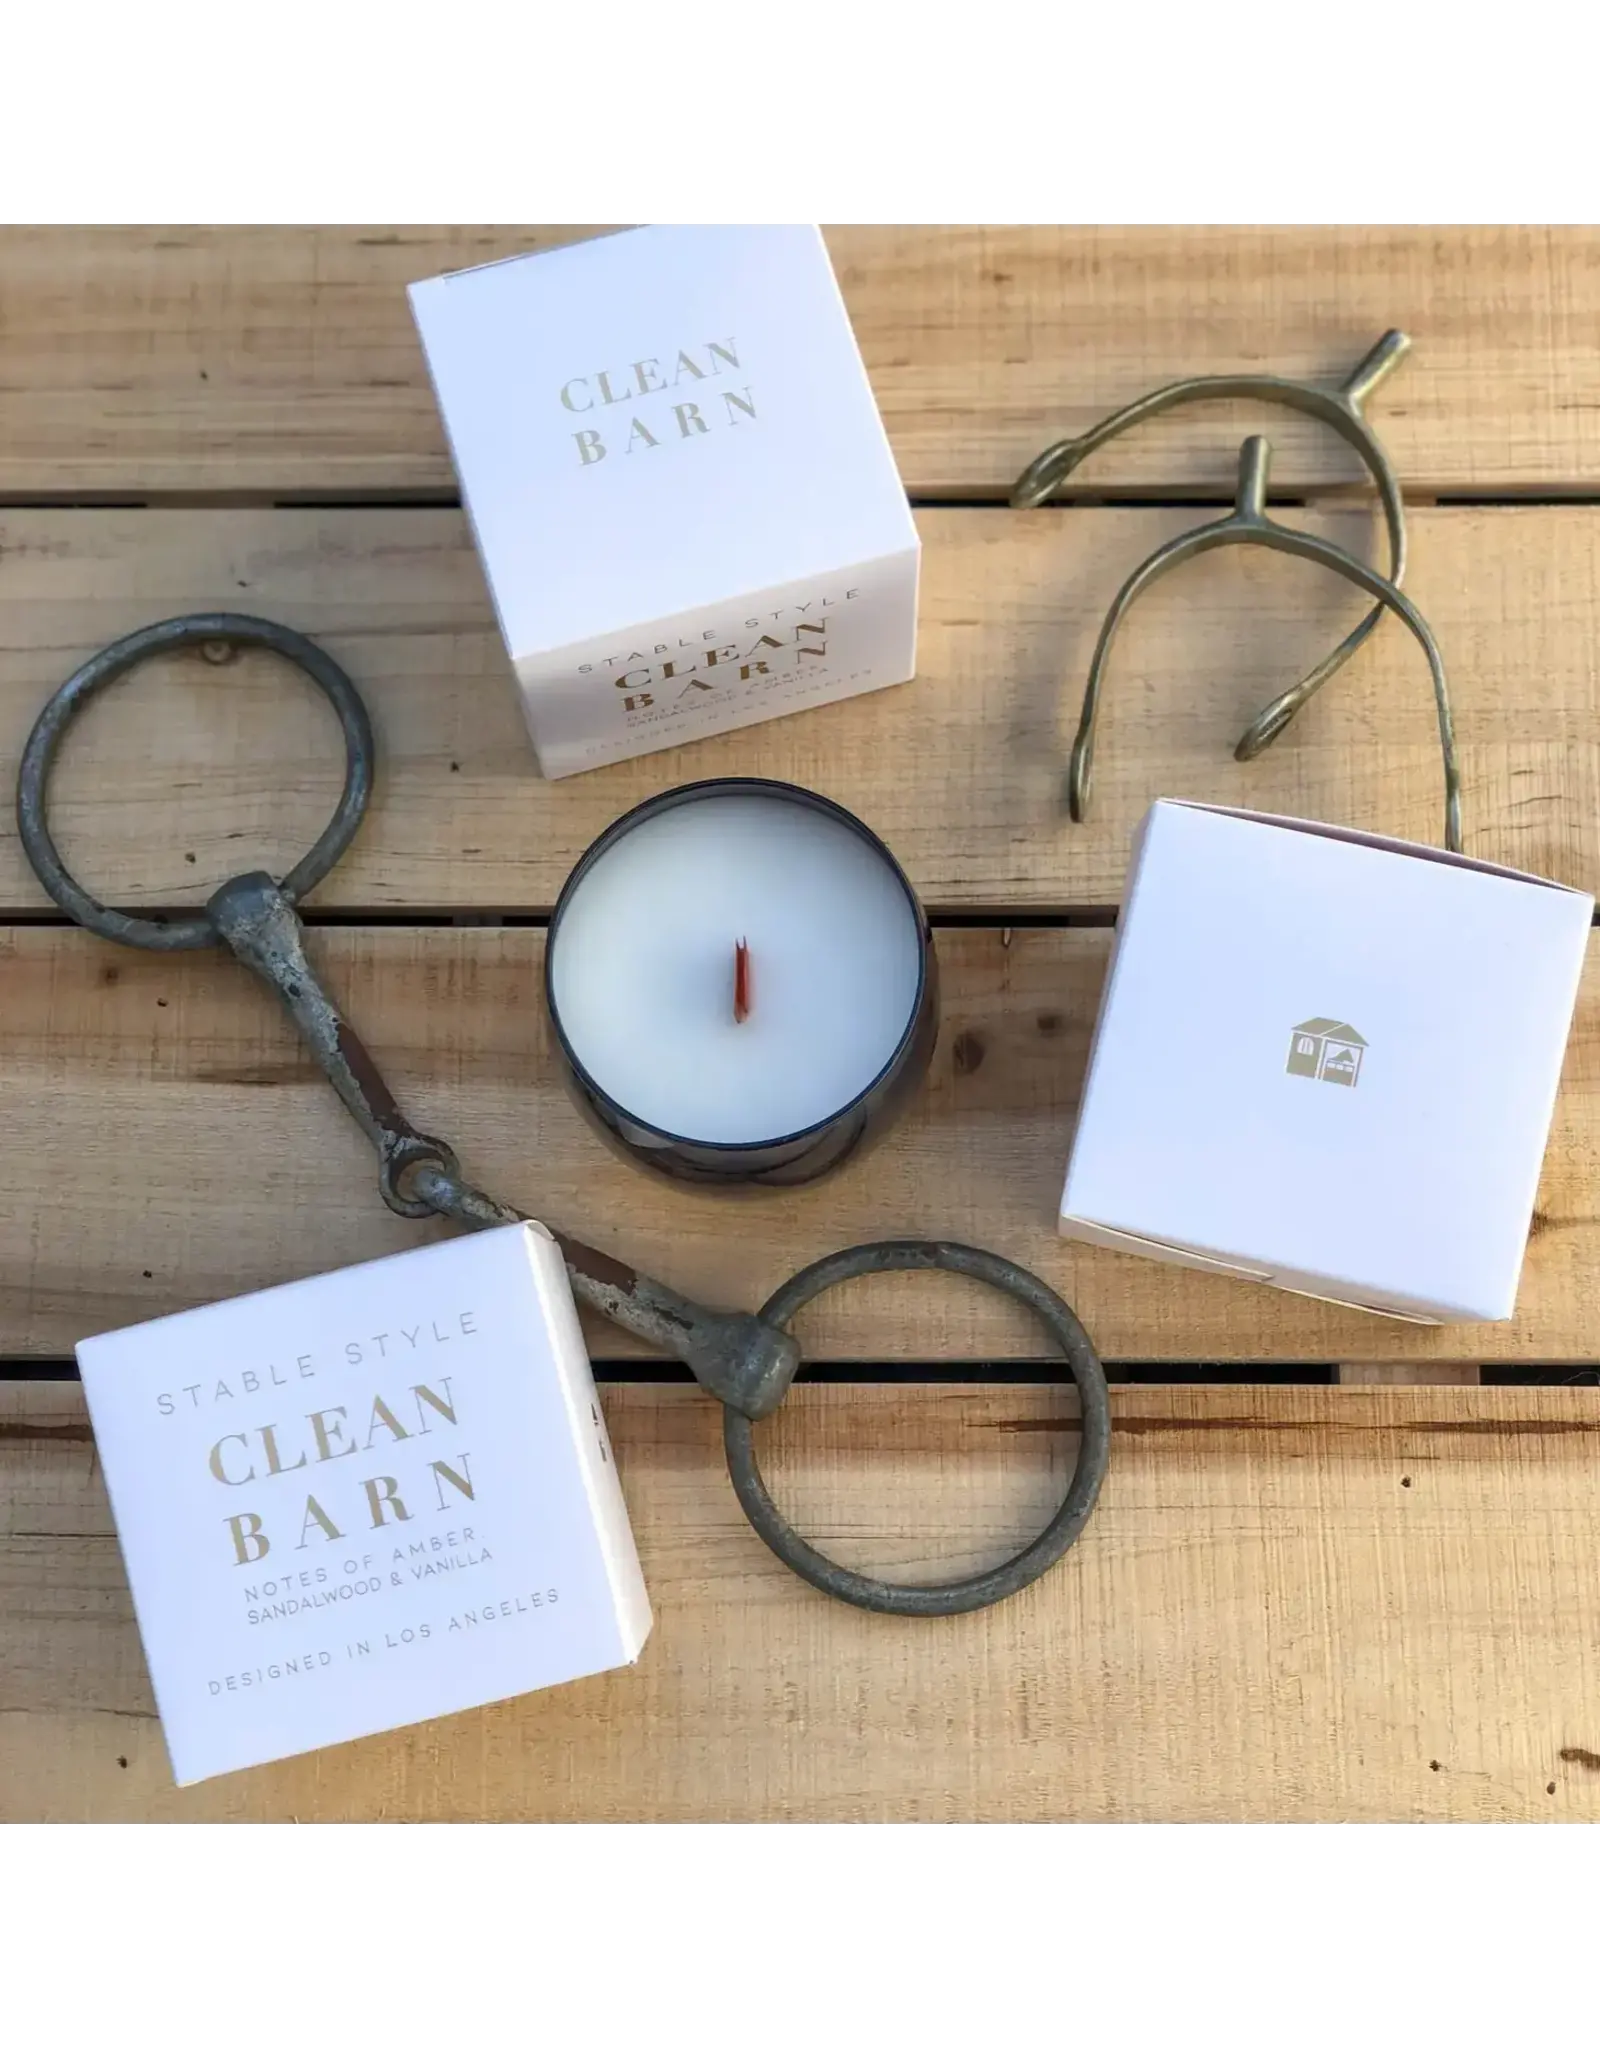 Clean Barn - Soy Wax Candle